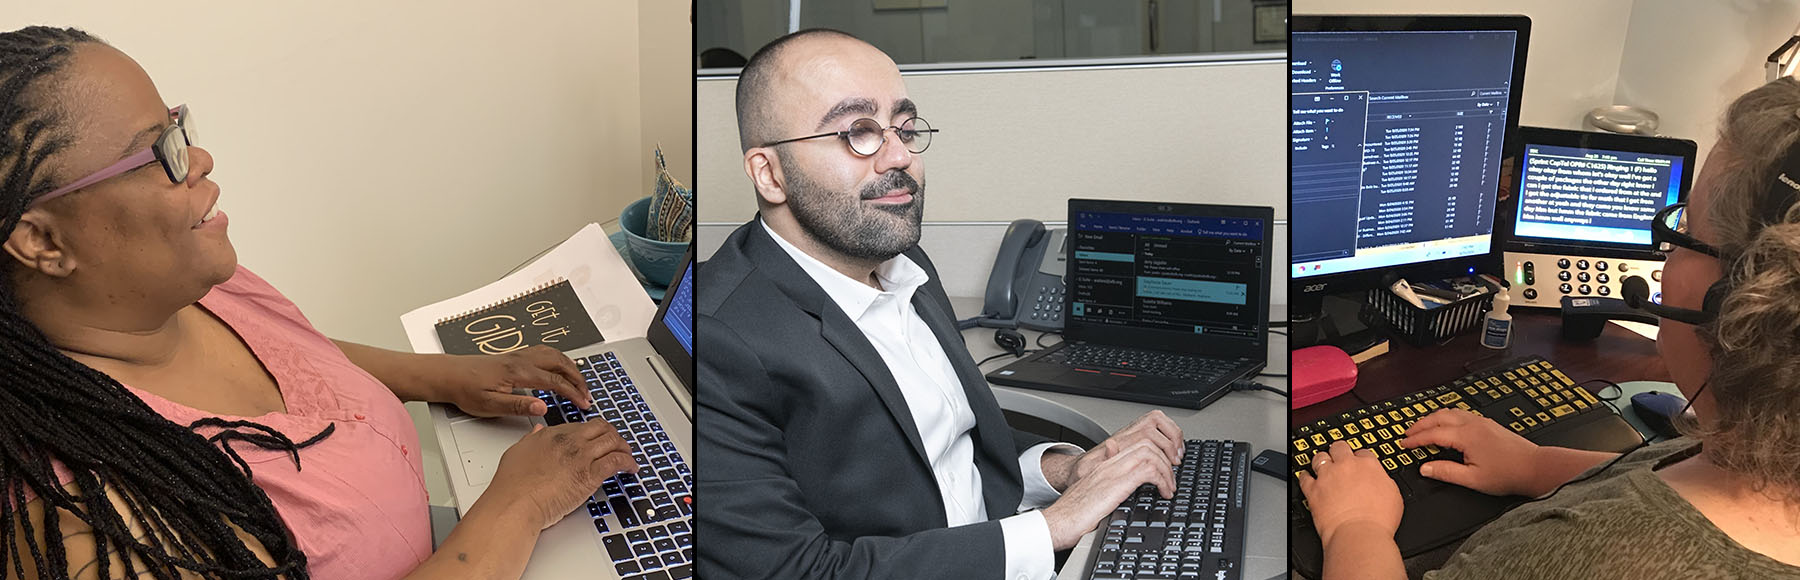 three photos of people using technology at work -- a woman using a laptop, a man wearing a suit and glasses, using a traditional keyboard and a large monitor, and a woman using a high-contrast keyboard and magnified screen